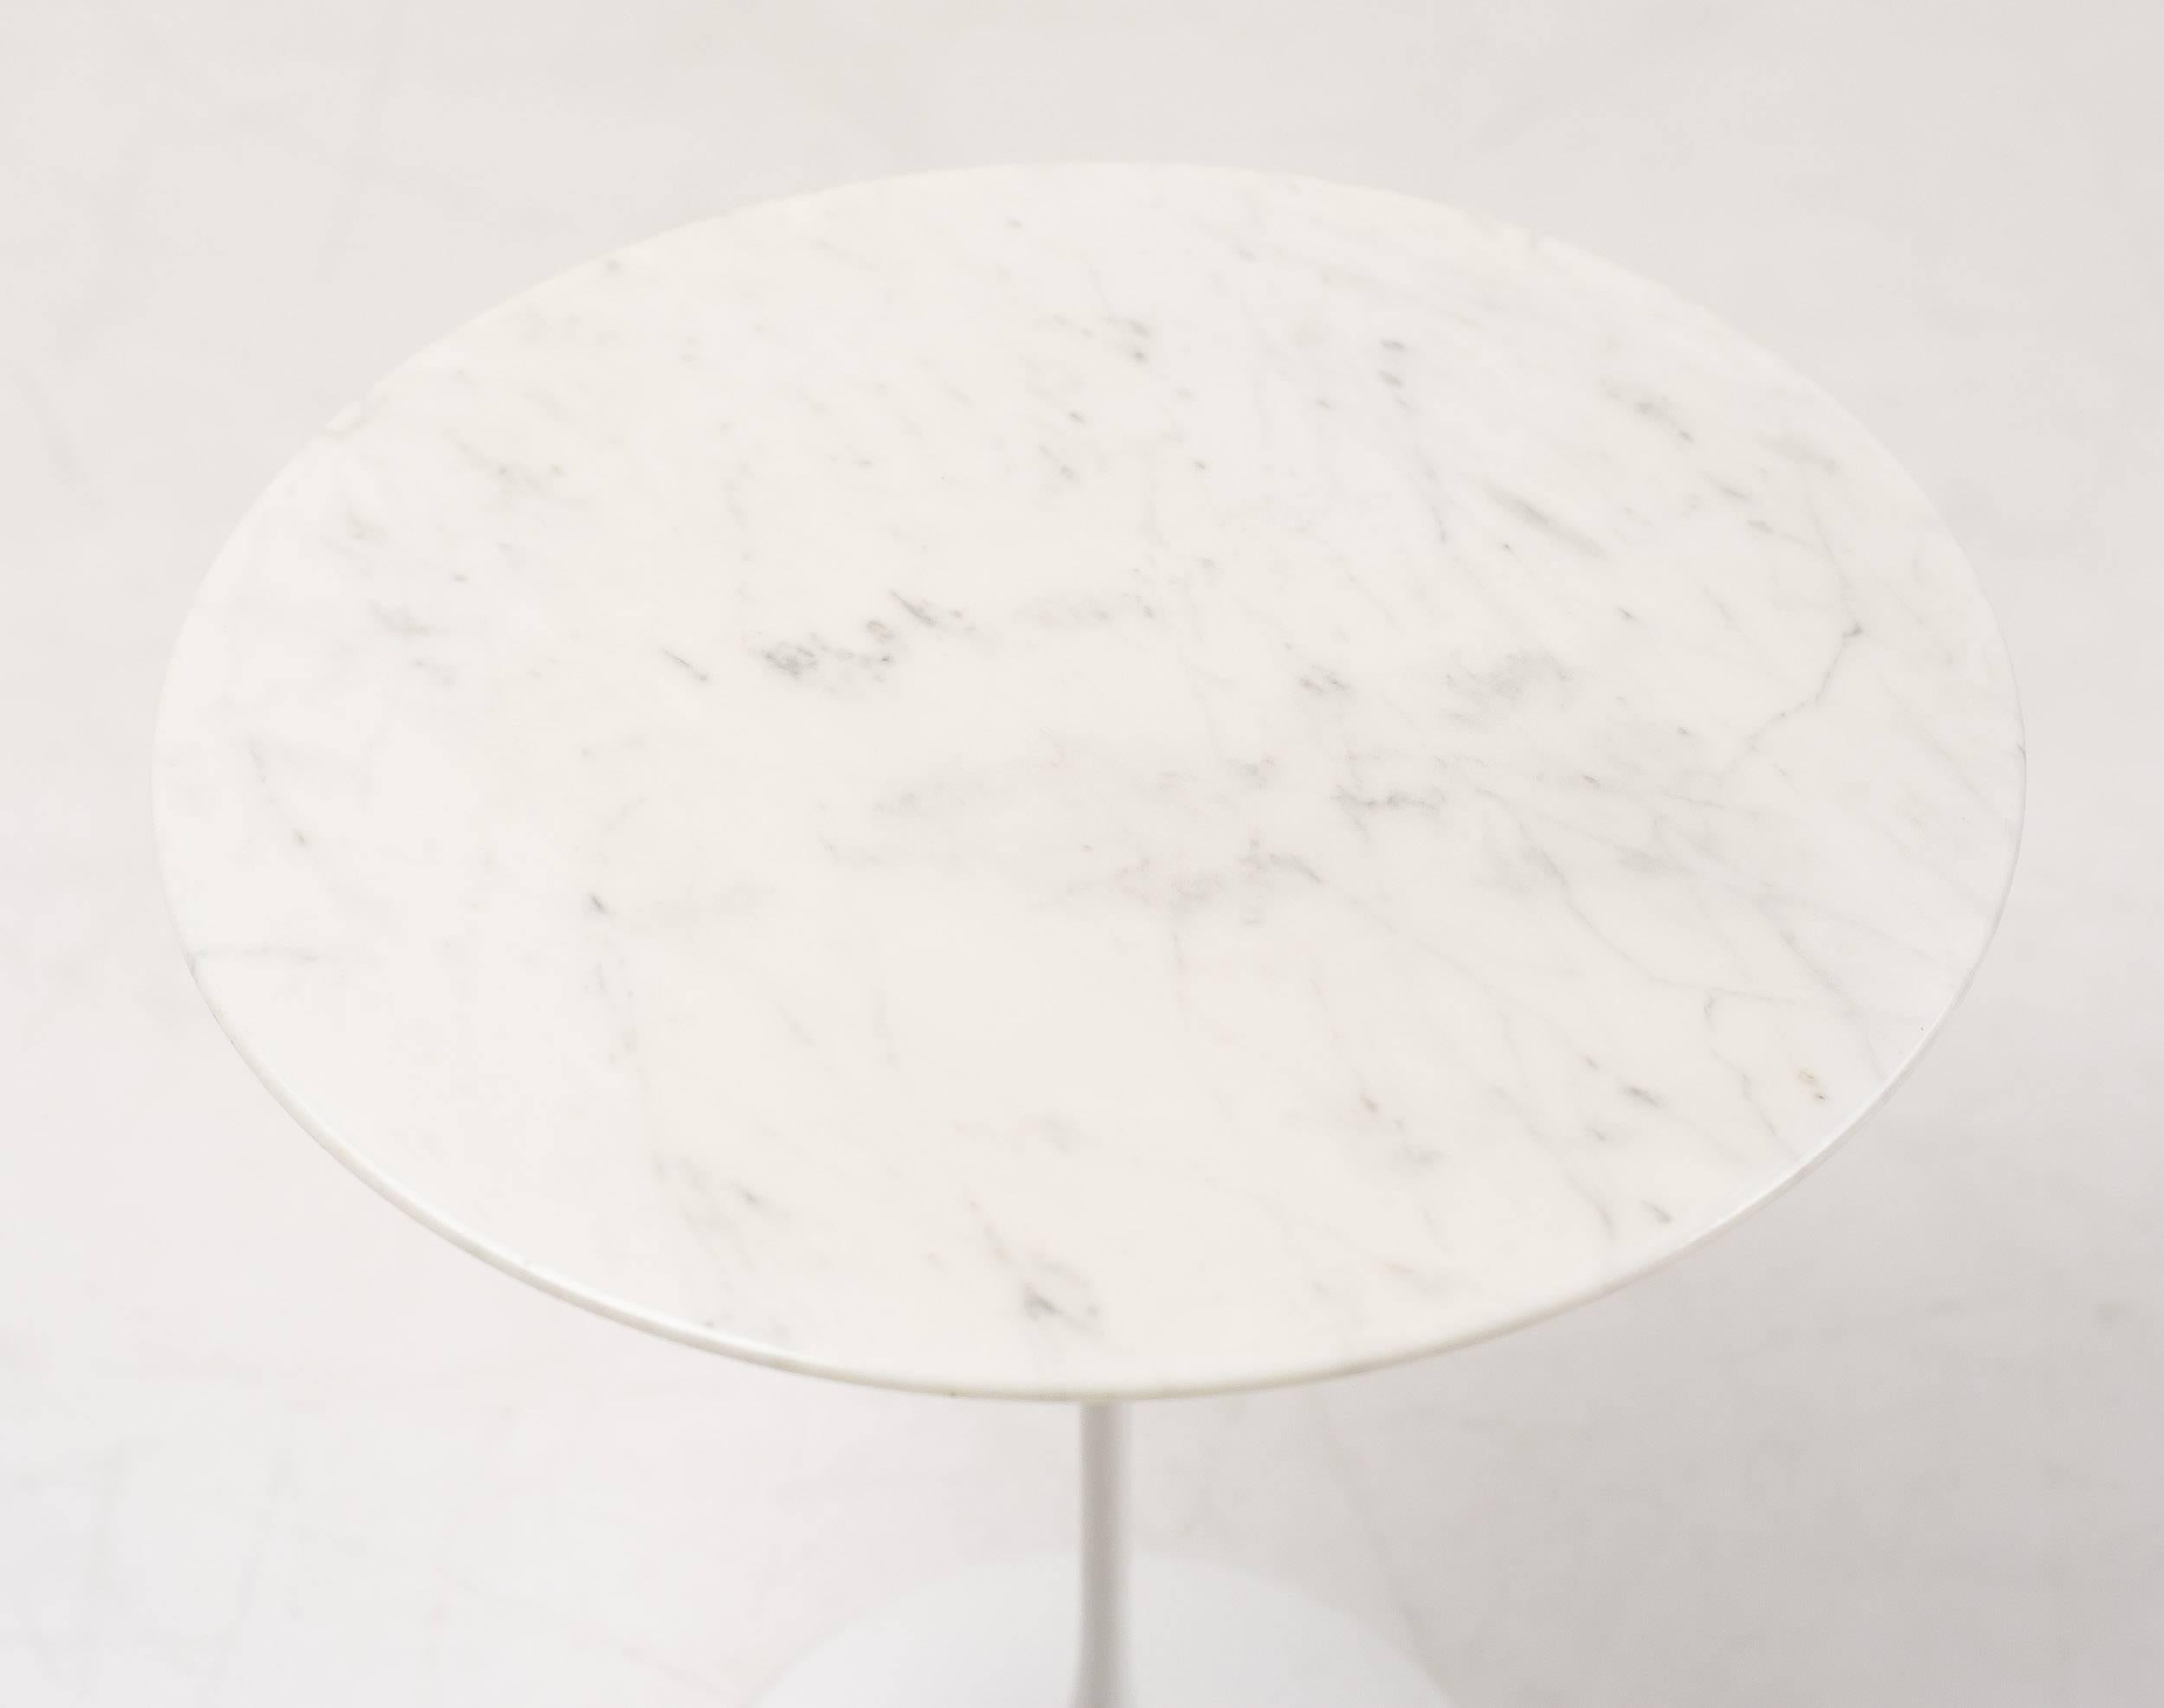 Very early marble side table by Eero Saarinen for Knoll International, Carrara marble top and white enameled base. Very slight discoloration of the top coating.
Marked under the base and with the Knoll logo at the edge of the base.

Excellent